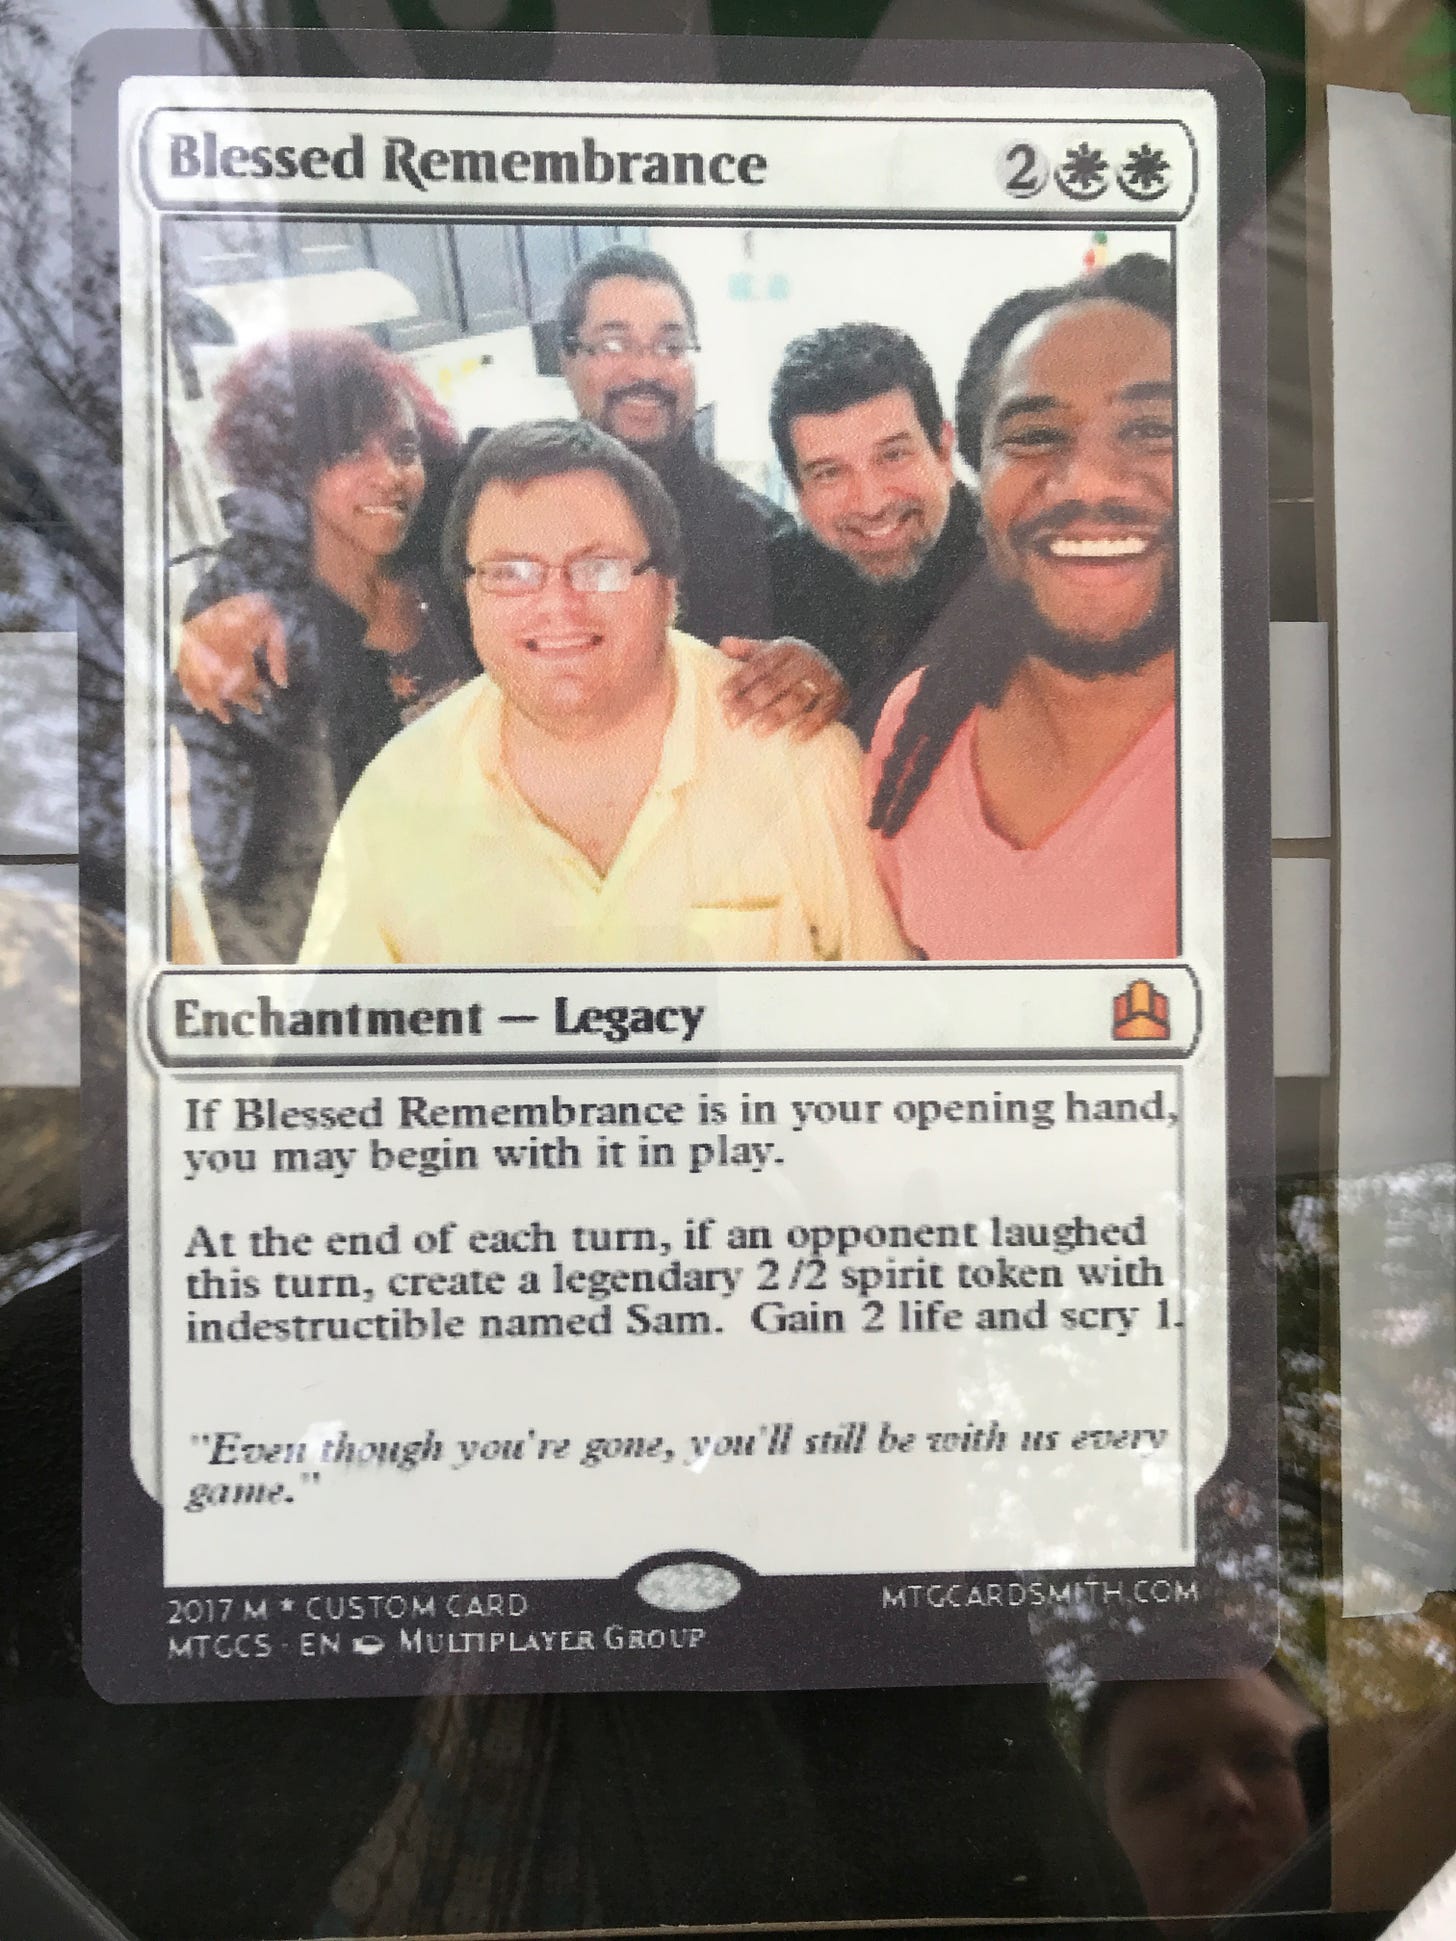 At the top of the card are the words "Blessed Remembrance." Under that is a photo of a bespectacled man in a yellow shirt (Sam) with four smiling friends. Below the photo are the words "Enchantment - Legacy." And then this text: "If Blessed Remembrance is in your opening hand, you may begin with it in play. At the end of each turn, if an opponent laughed this turn, create a legendary 2 /2 spirit token with indestructible named Sam. Gain 2 life and scry 1. 'Even though you're gone, you'll still be with us every game.'"